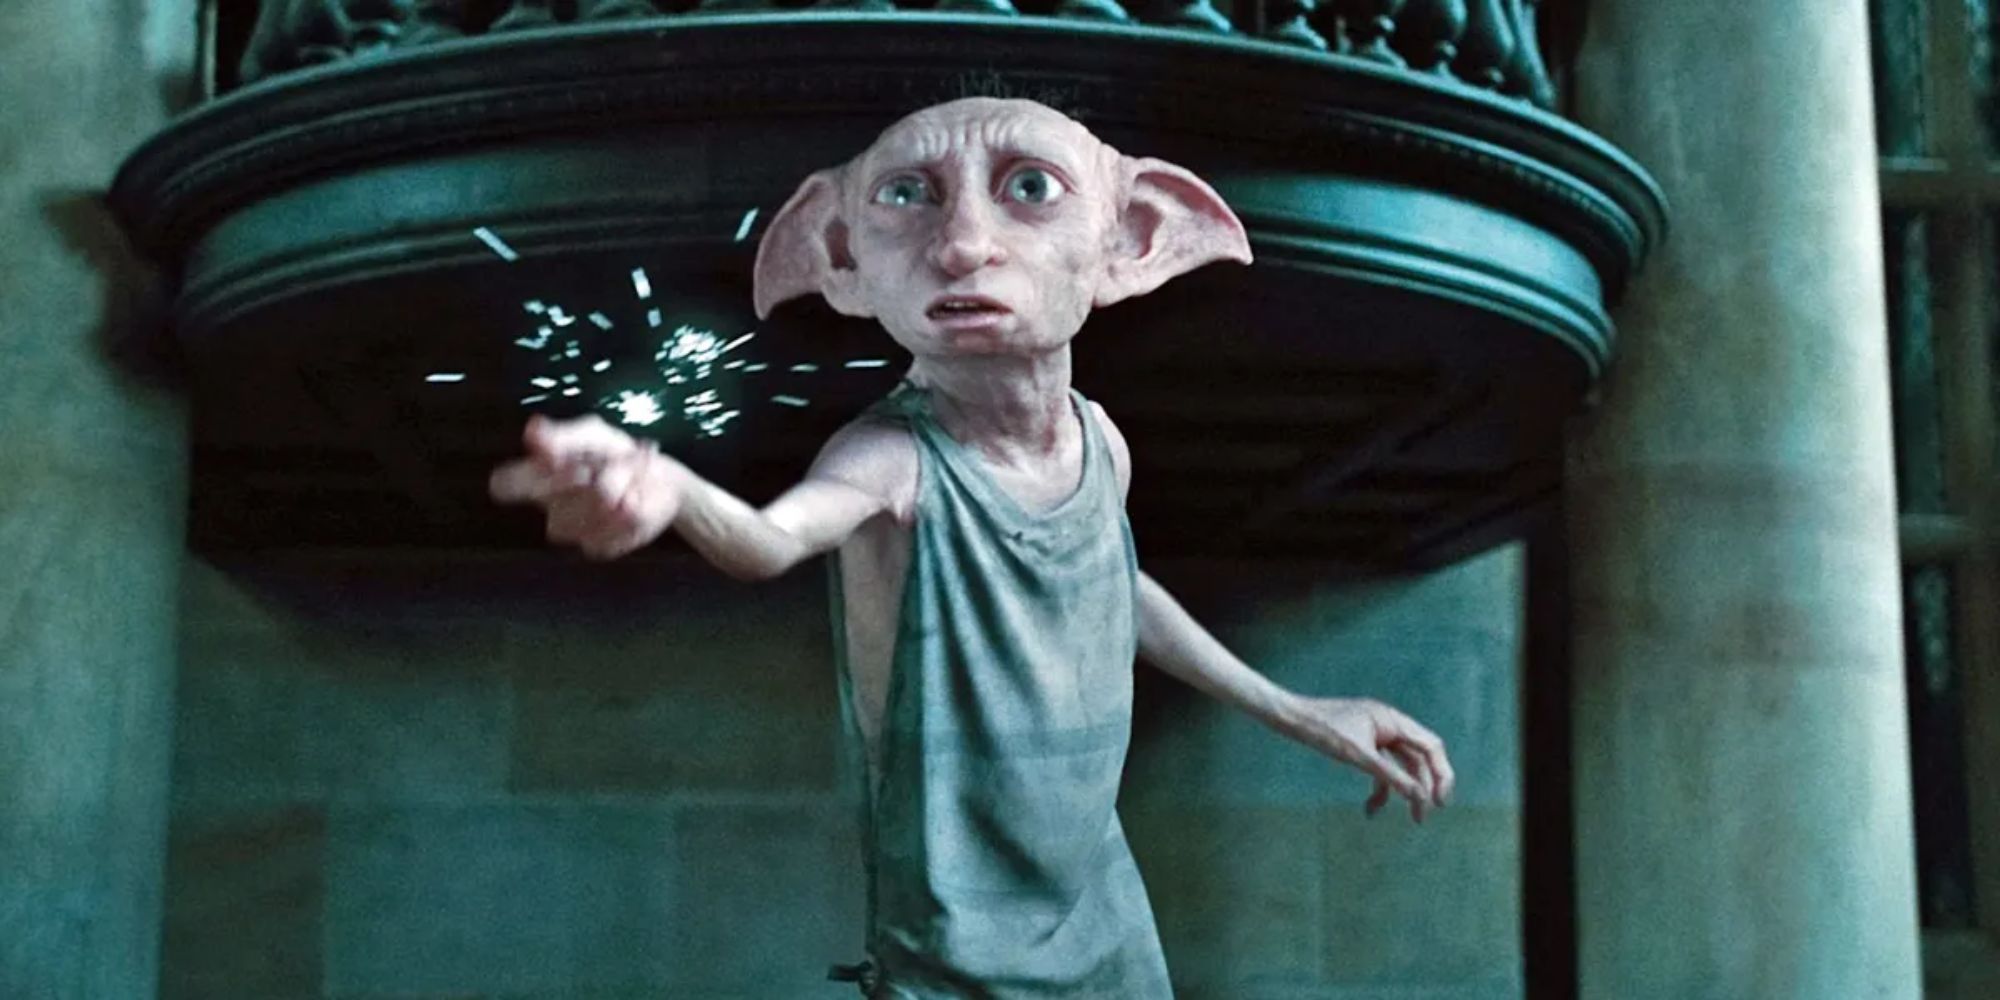 Magic emanates from Dobby's fingers as he snaps 